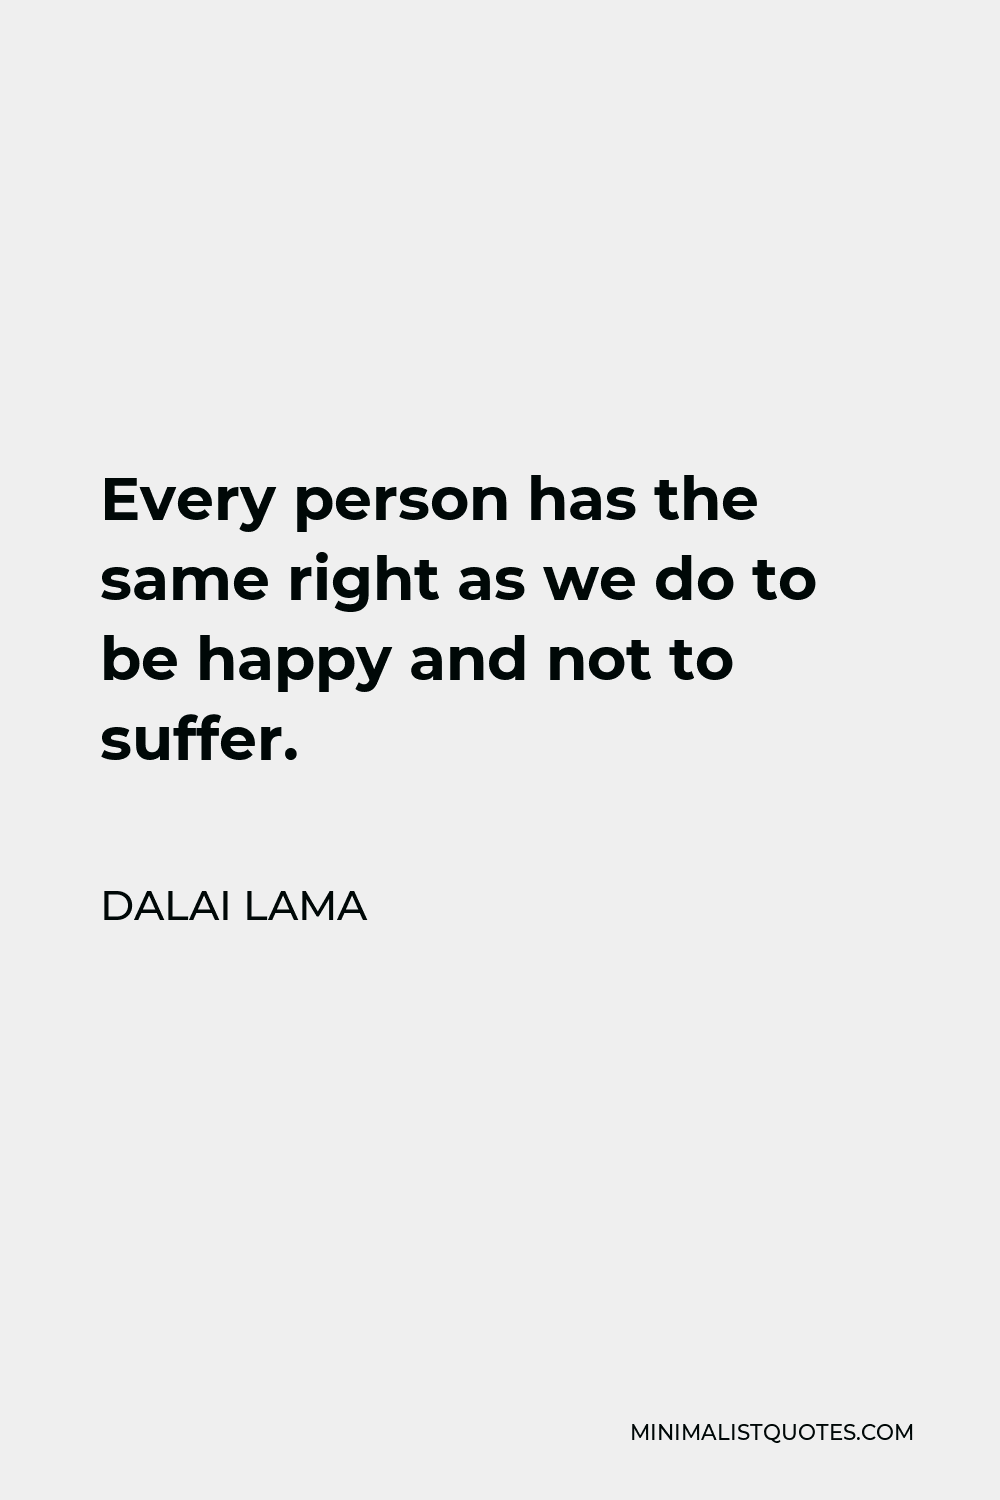 Dalai Lama Quote - Every person has the same right as we do to be happy and not to suffer.